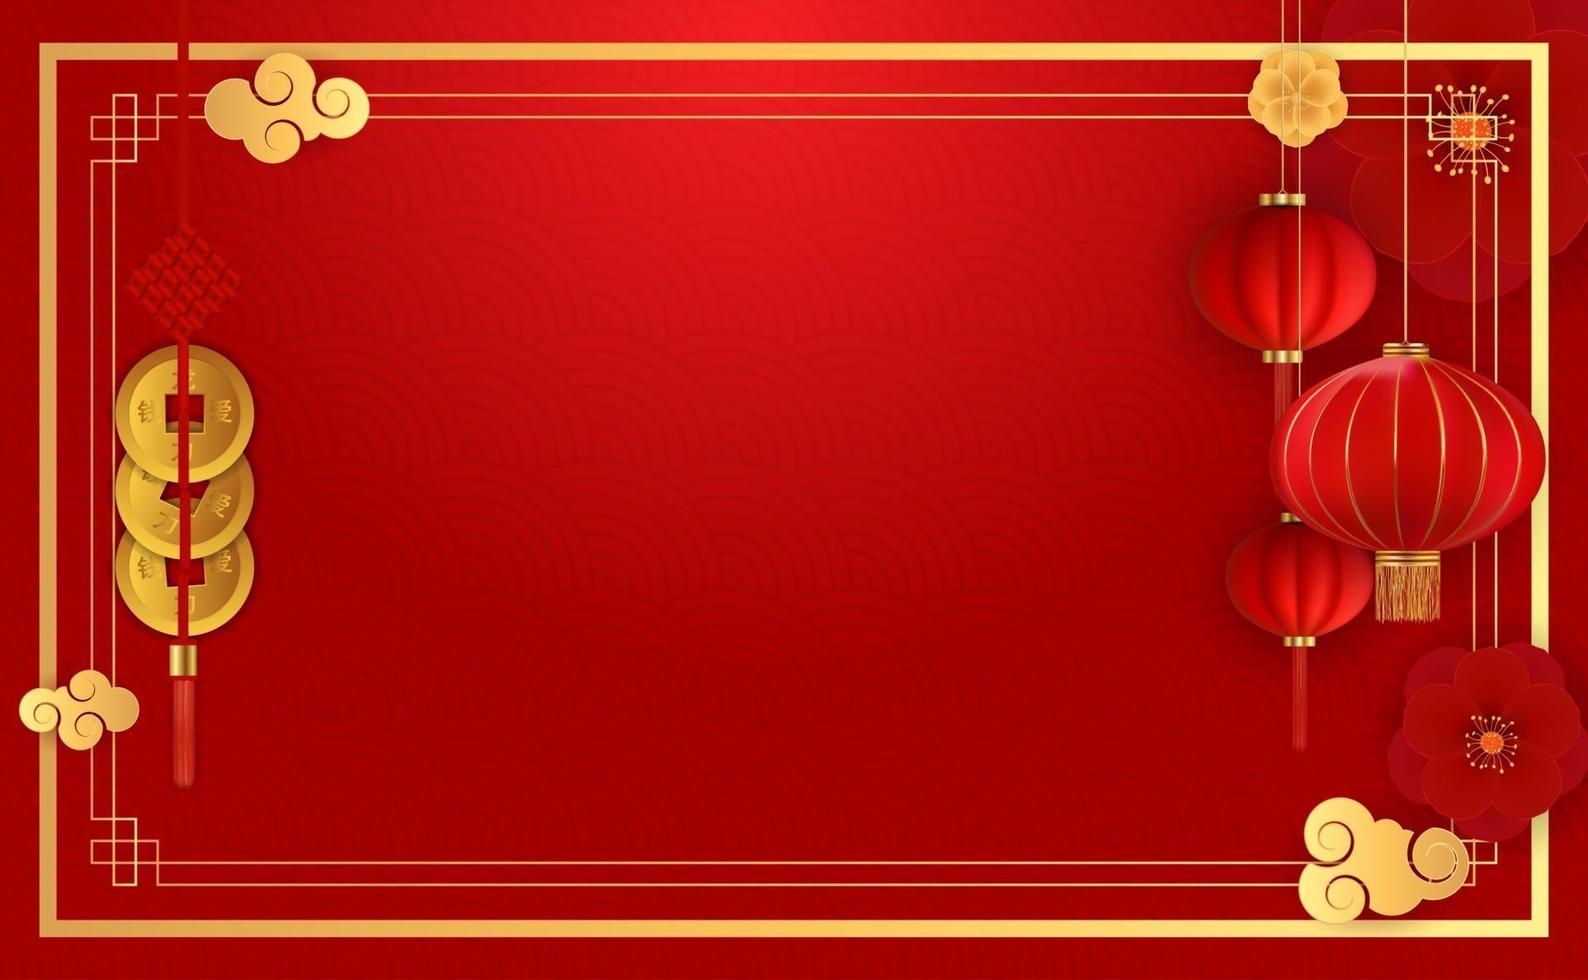 Abstract Chinese Holiday Background with plum flowers. Vector Illustration EPS10